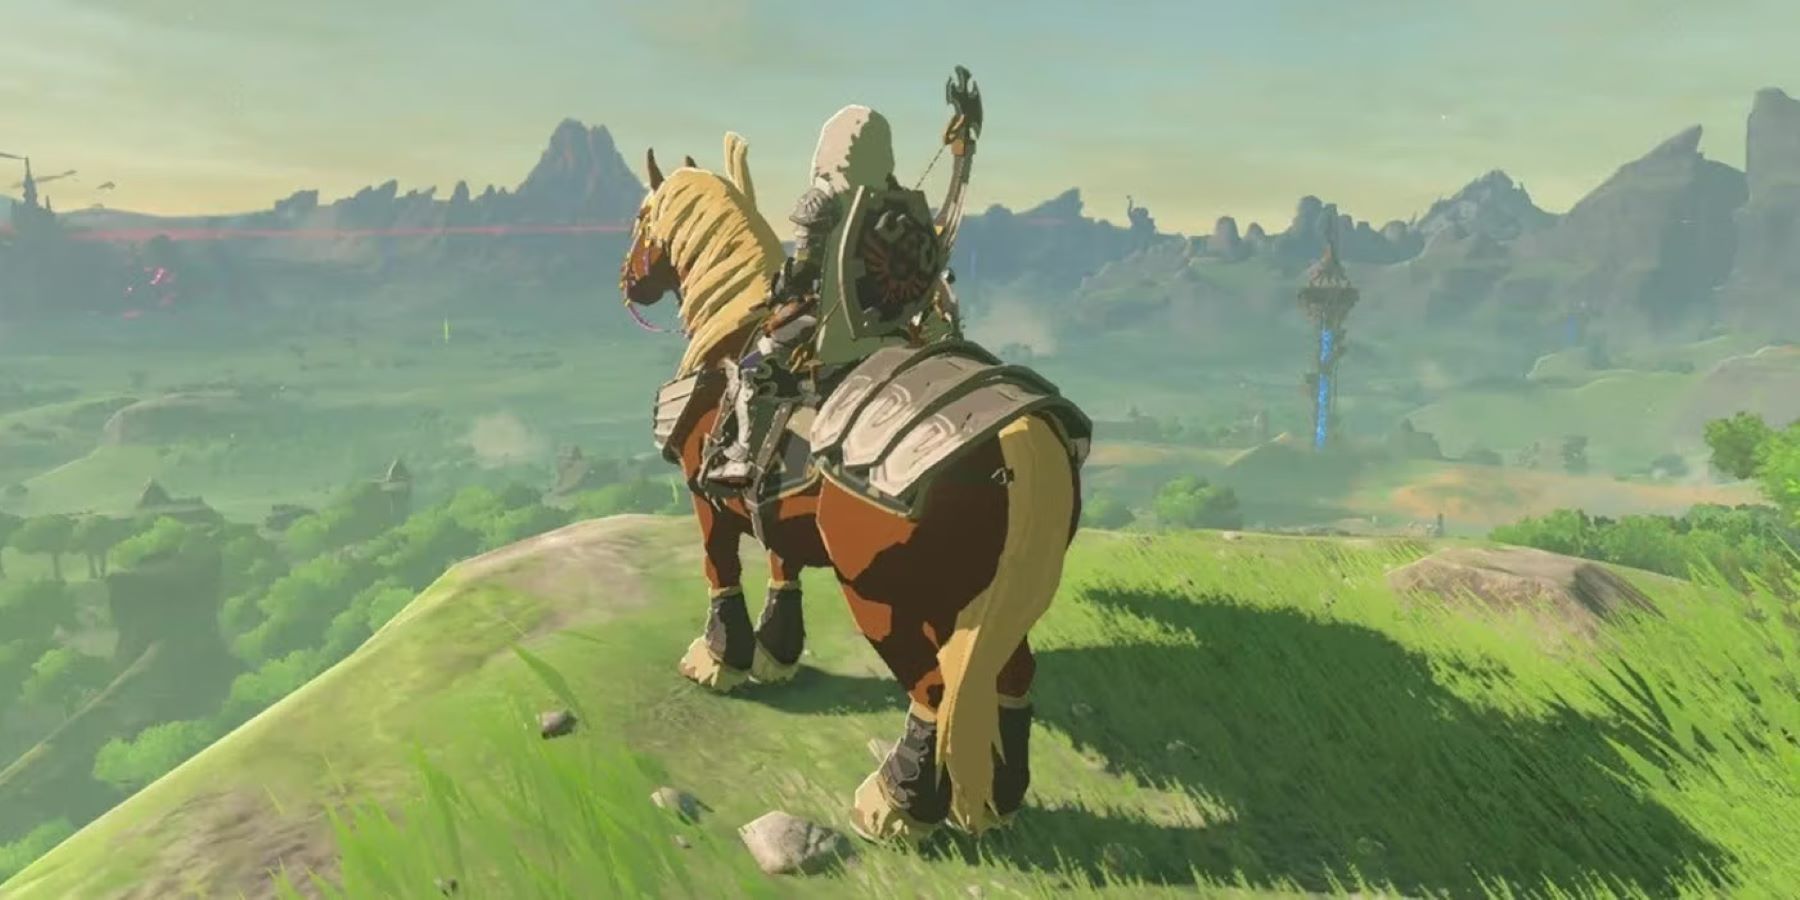 Link riding a horse and looking out on Hyrule in The Legend of Zelda: Breath of the Wild